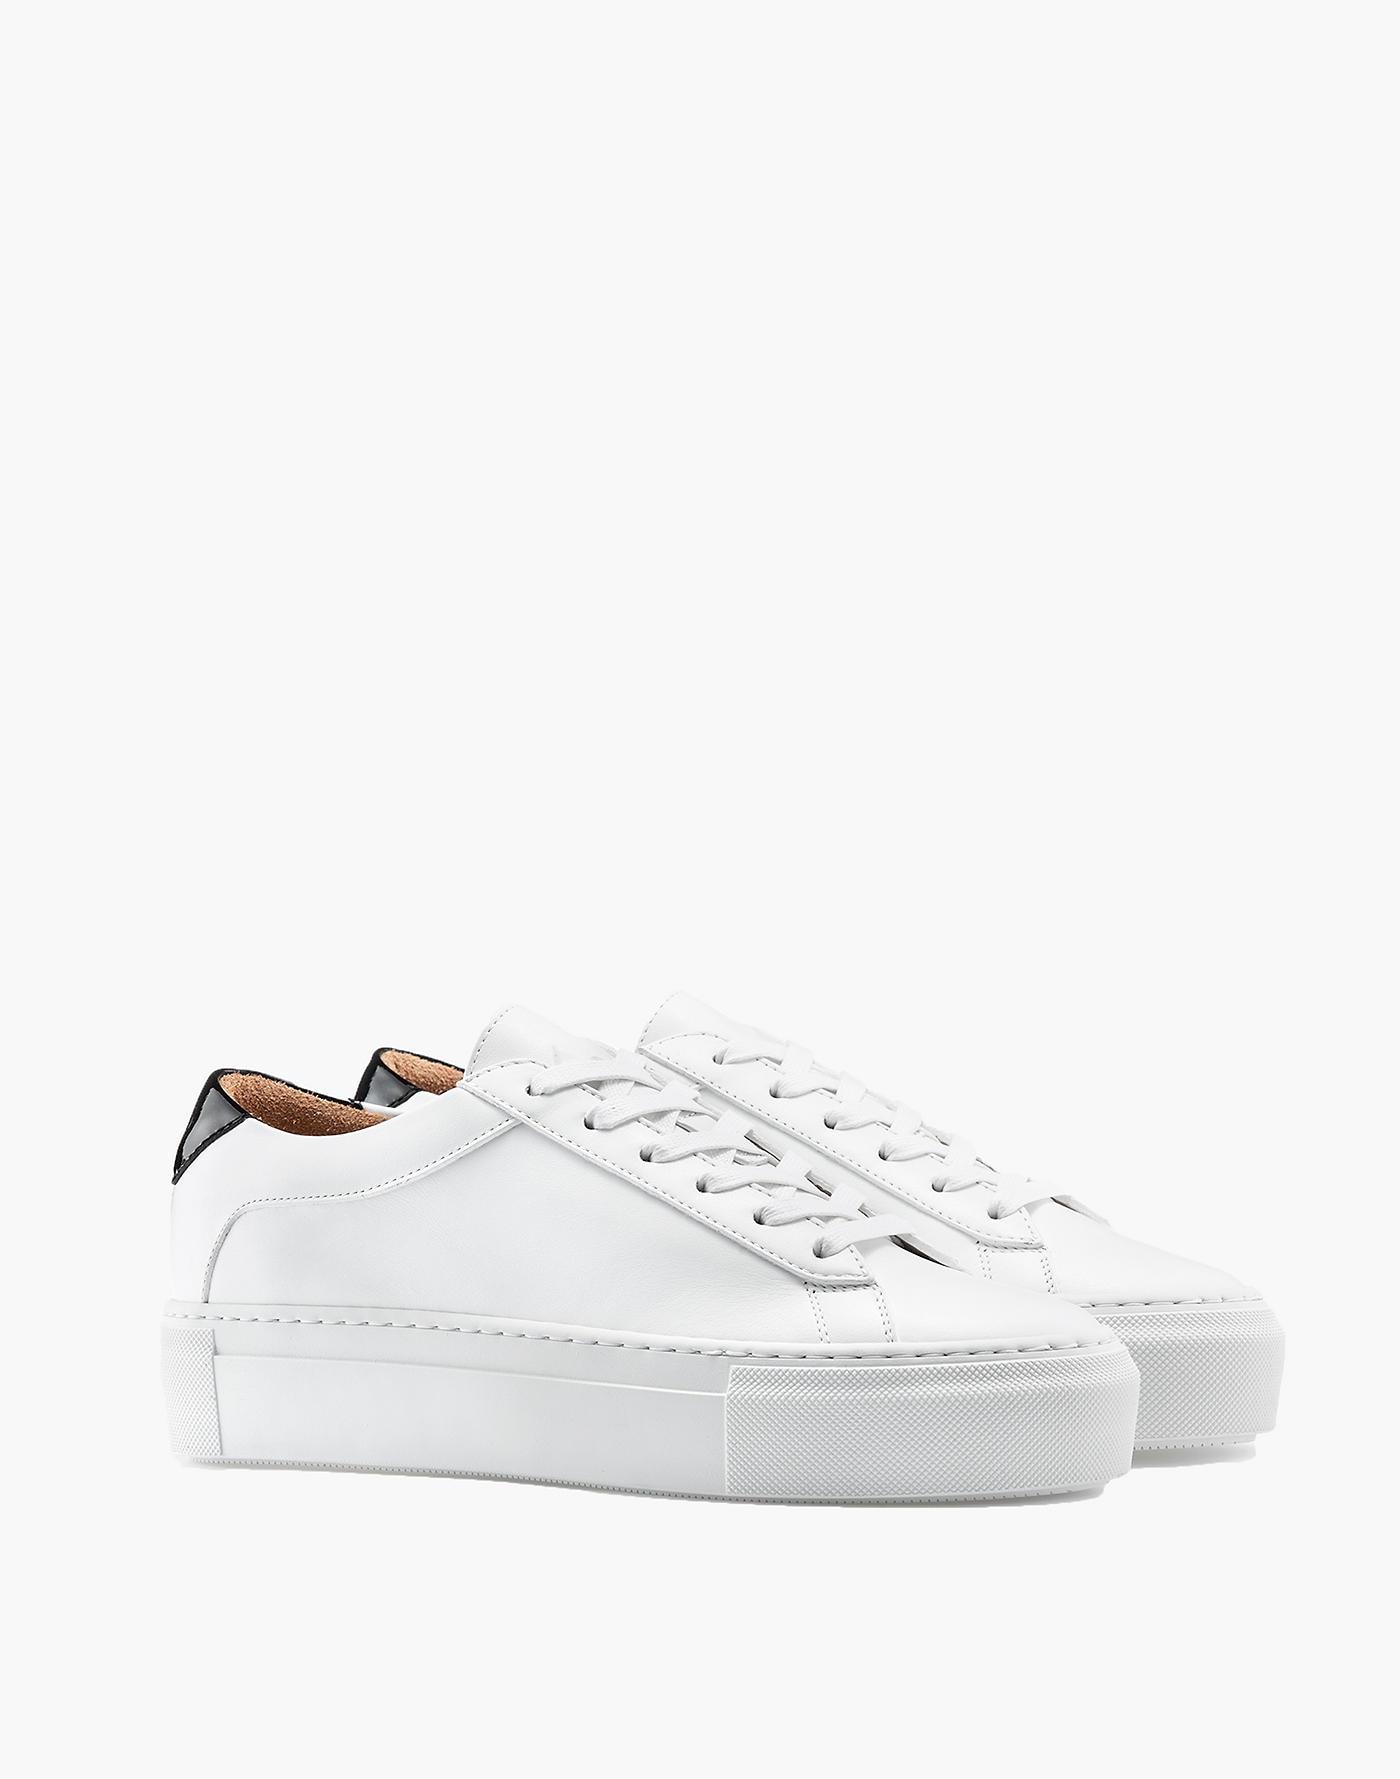 Madewell Unisex Koio Bianco Platform Sneakers In White Leather in White ...